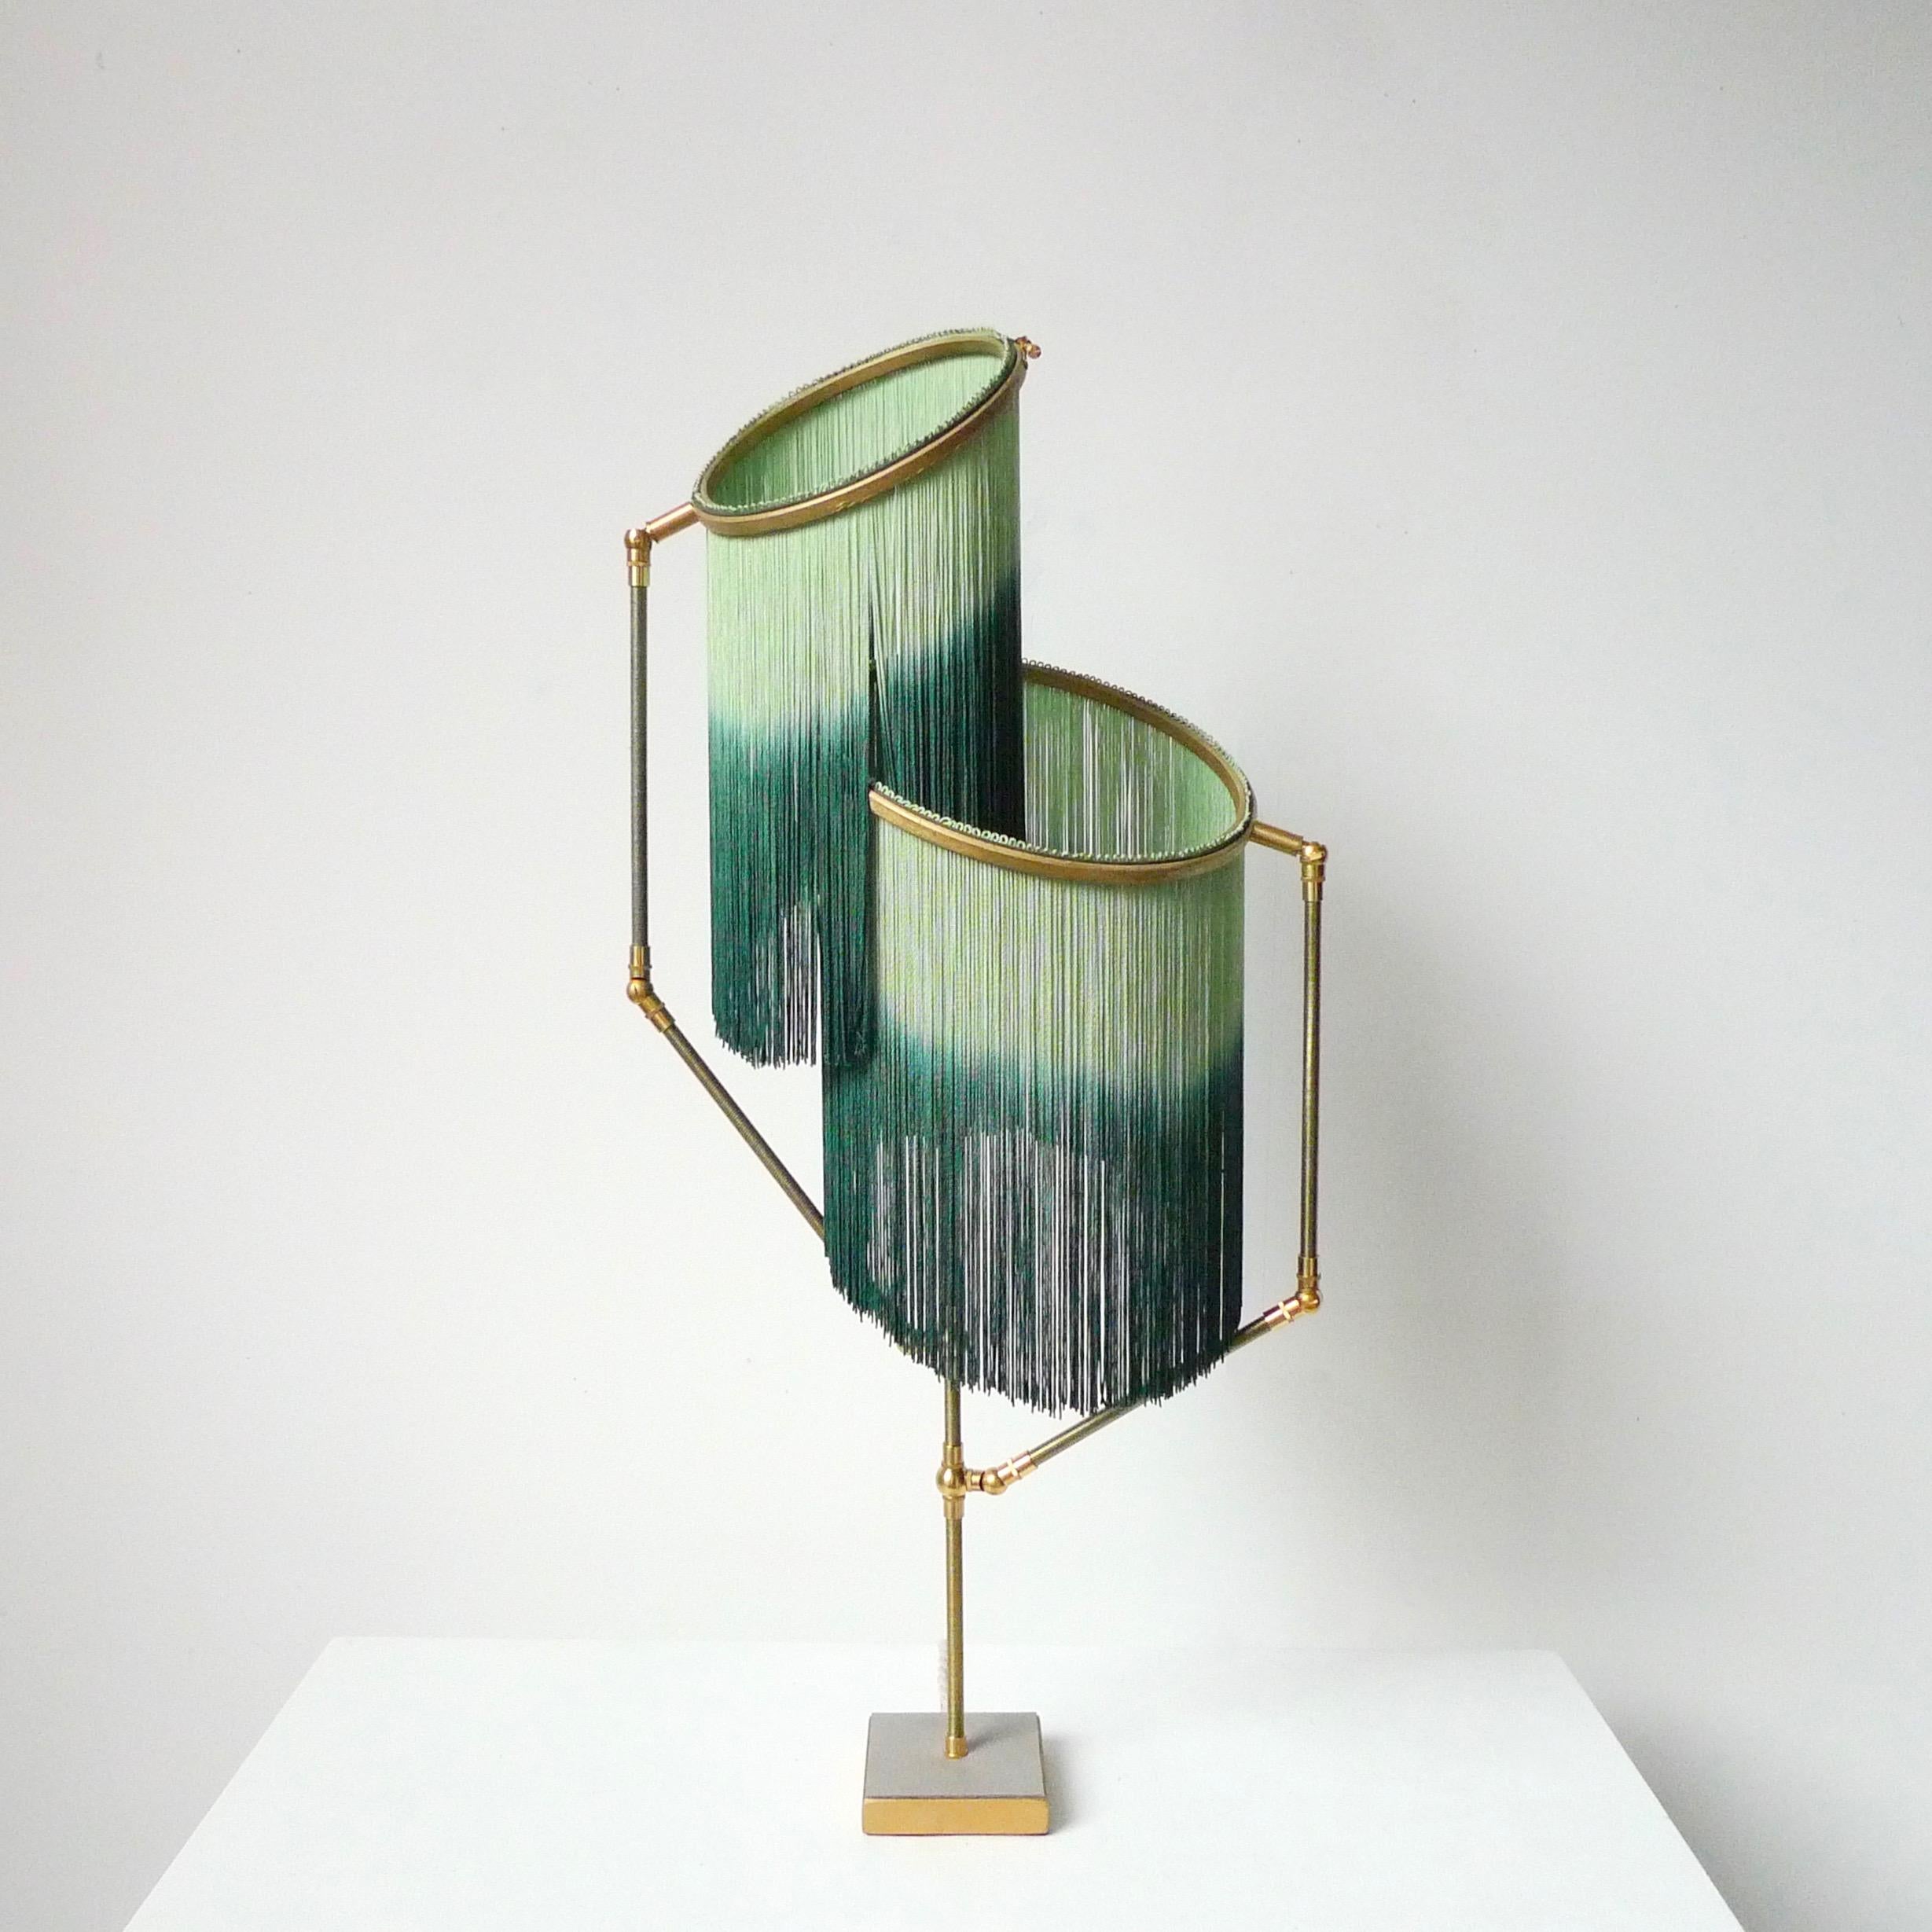 Charme Table Lamp by Sander Bottinga

Dimensions: H 73 x W 38 x D 25 cm
Hand-sculpted in brass, leather, wood and dip dyed colored Fringes in viscose.
The movable arms makes it possible to move the circles with fringes in differed positions.
So